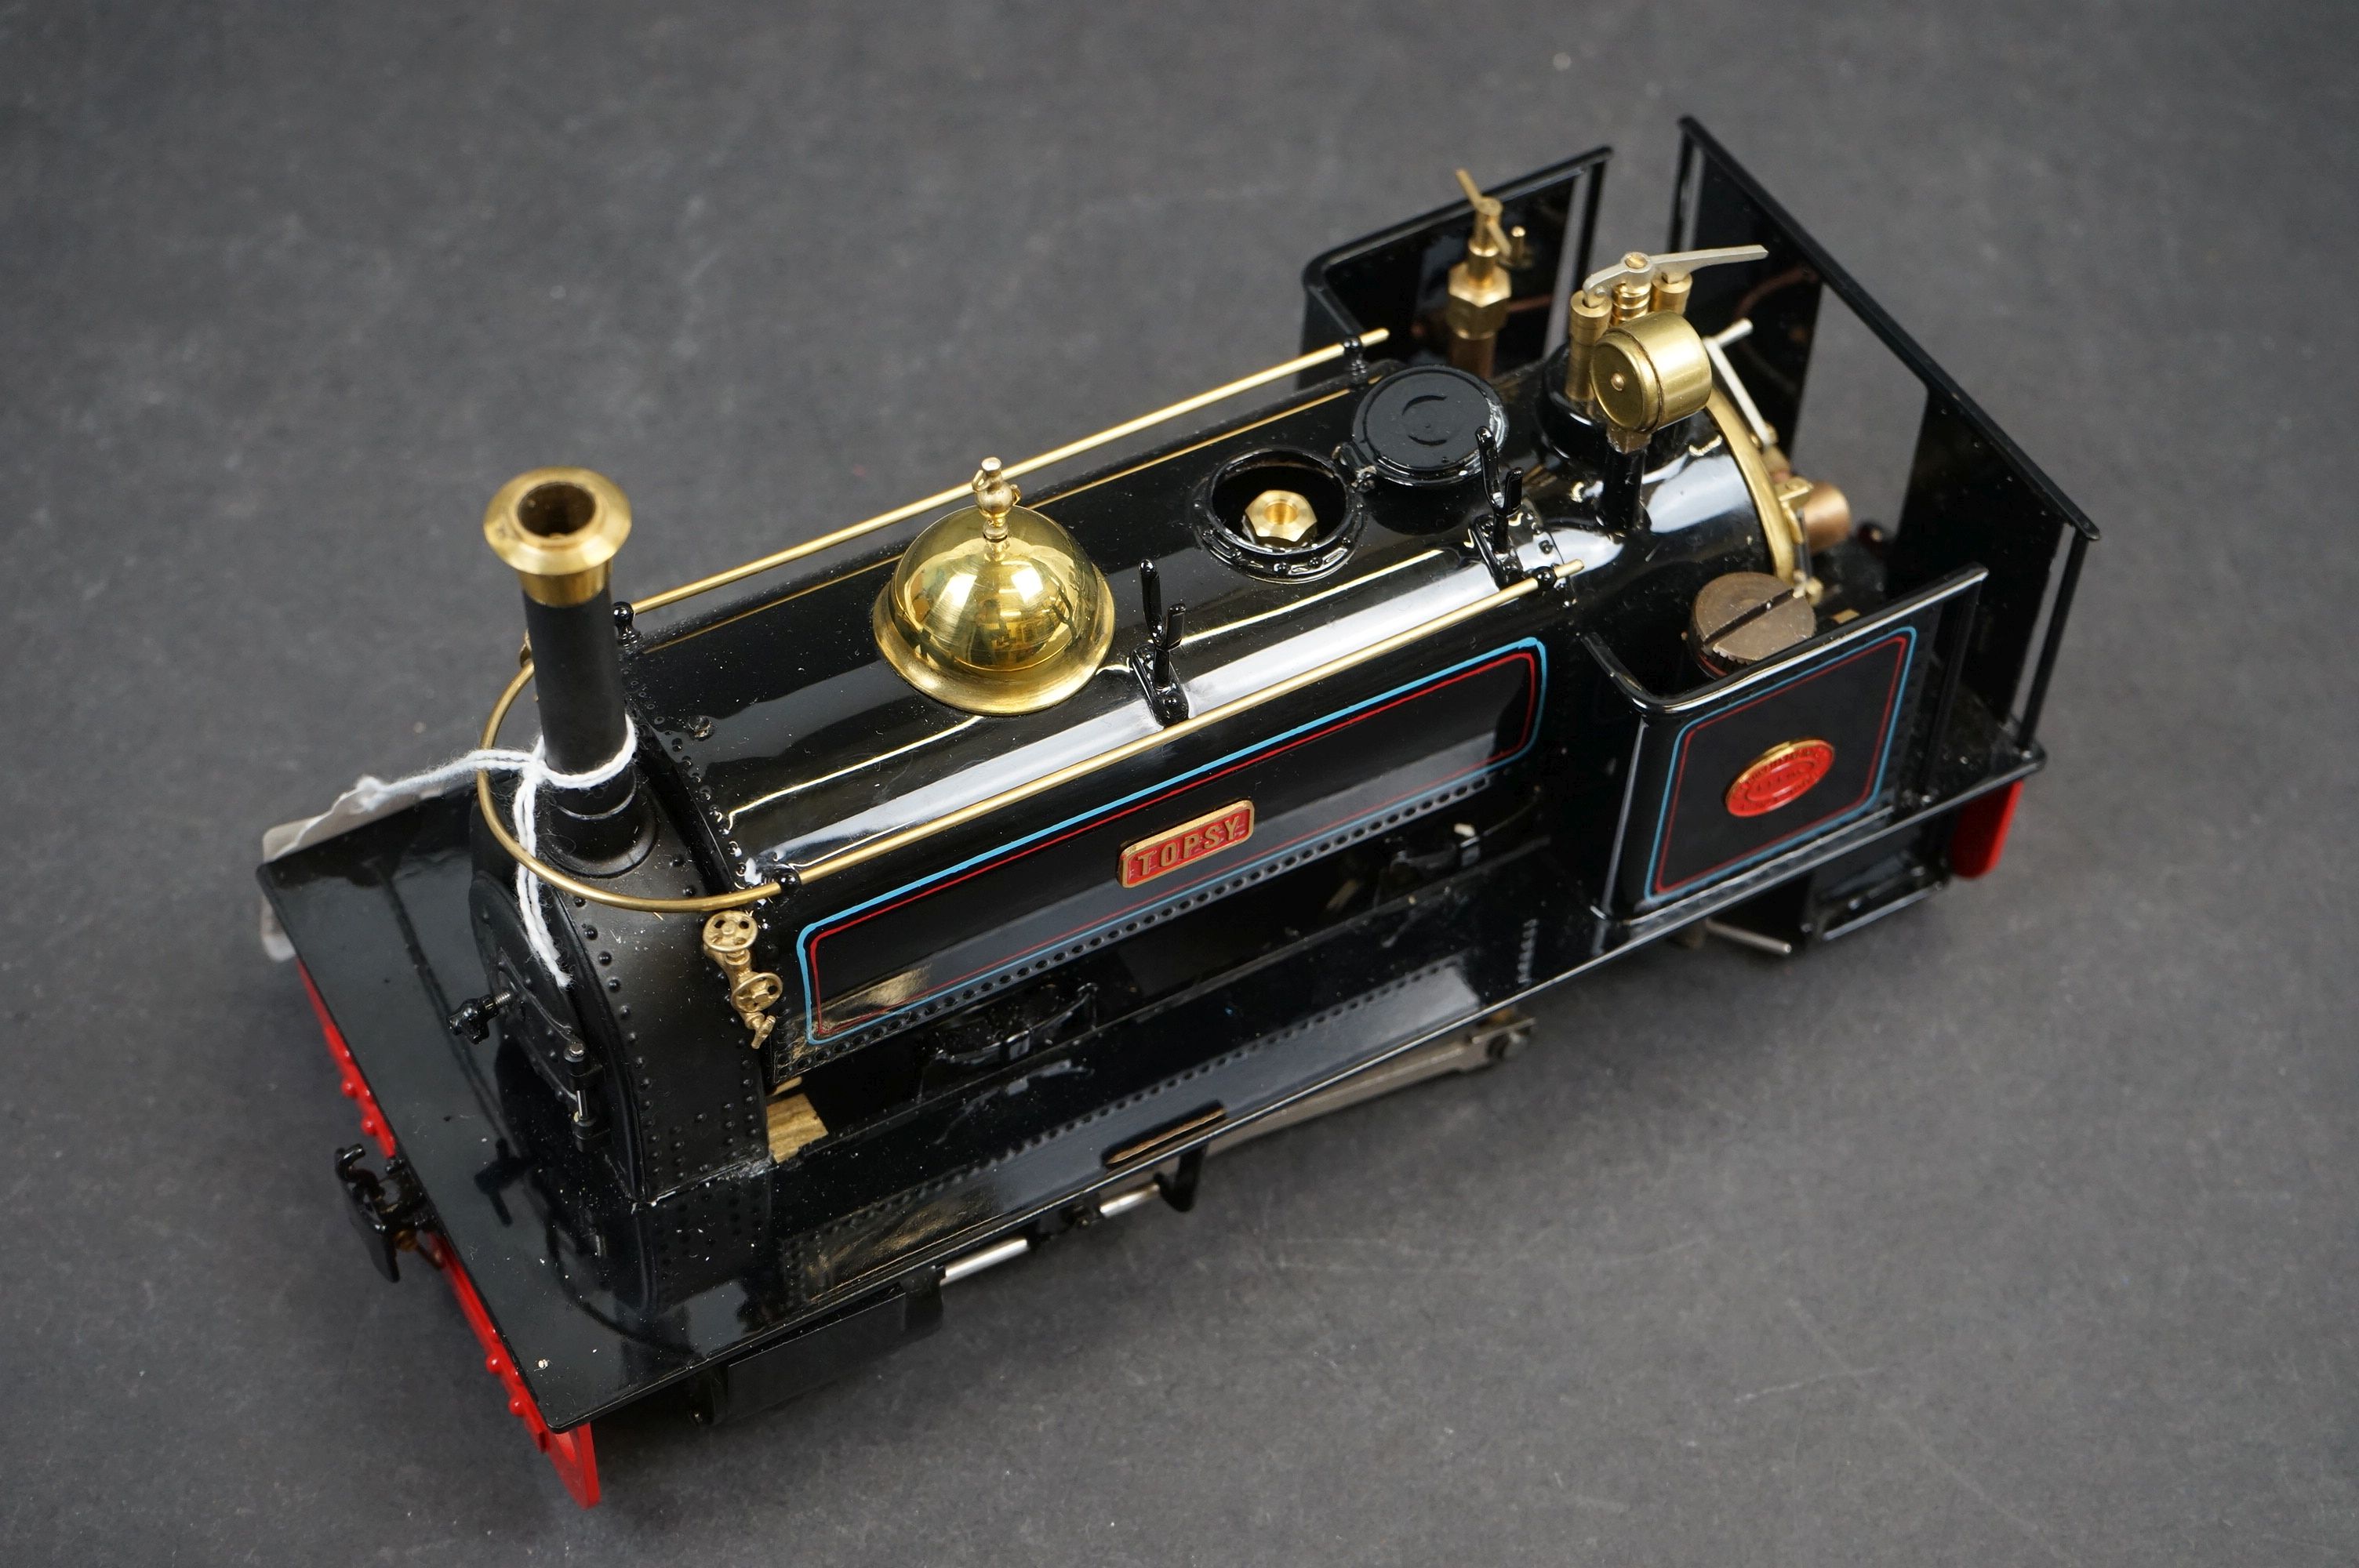 Finescale Engineering Co O Gauge Live Steam 0-4-0 Saddle Tank Locomotive 'Topsy' in black livery, - Image 7 of 7